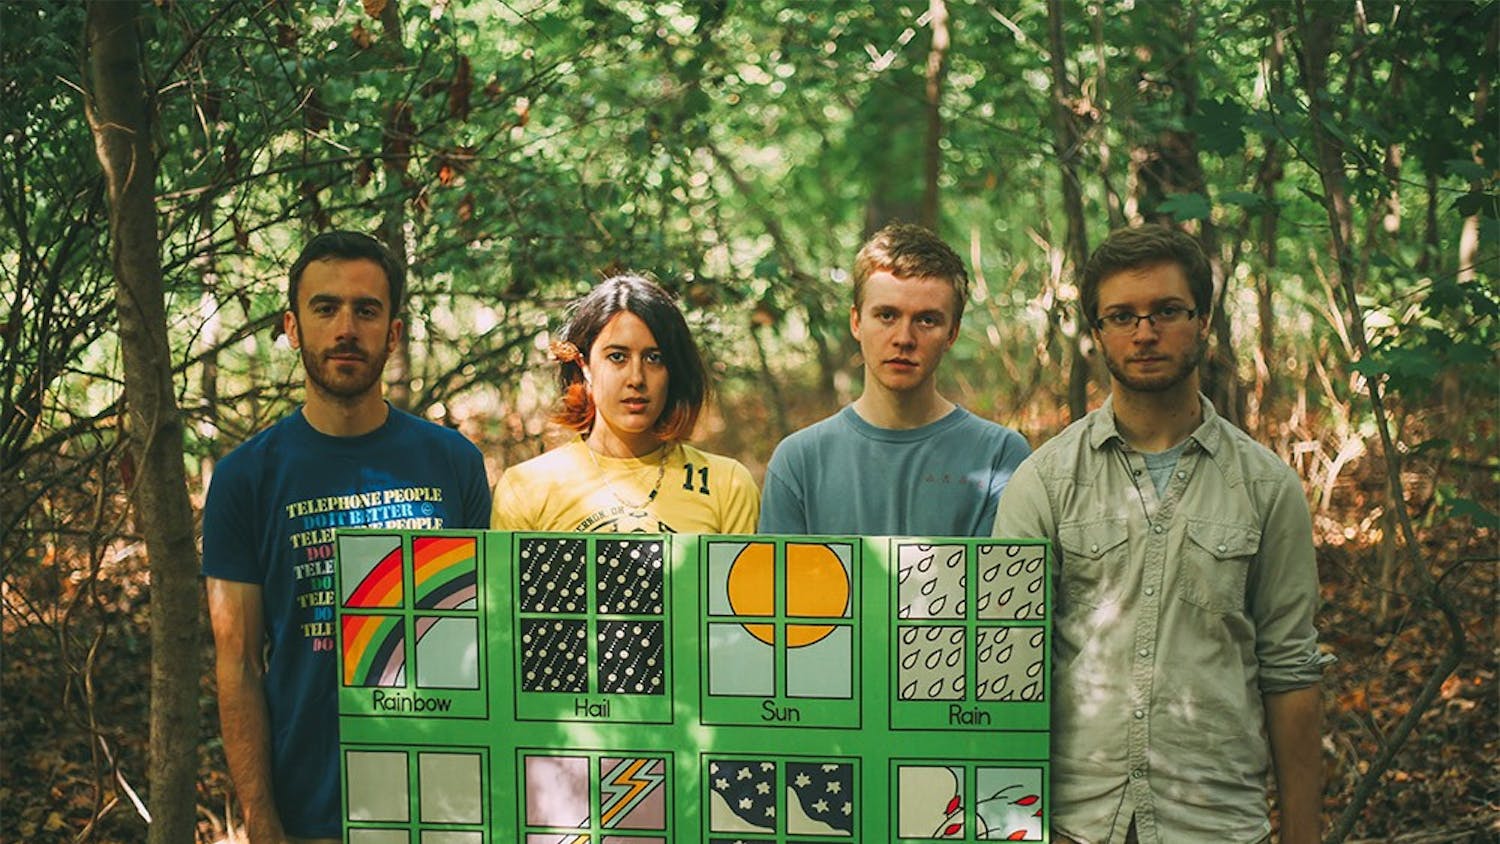 New Jersey-based alt-country band Pinegrove will play Friday at Uel Zing Coffee. The group released its debut LP, “Cardinal,” in February.